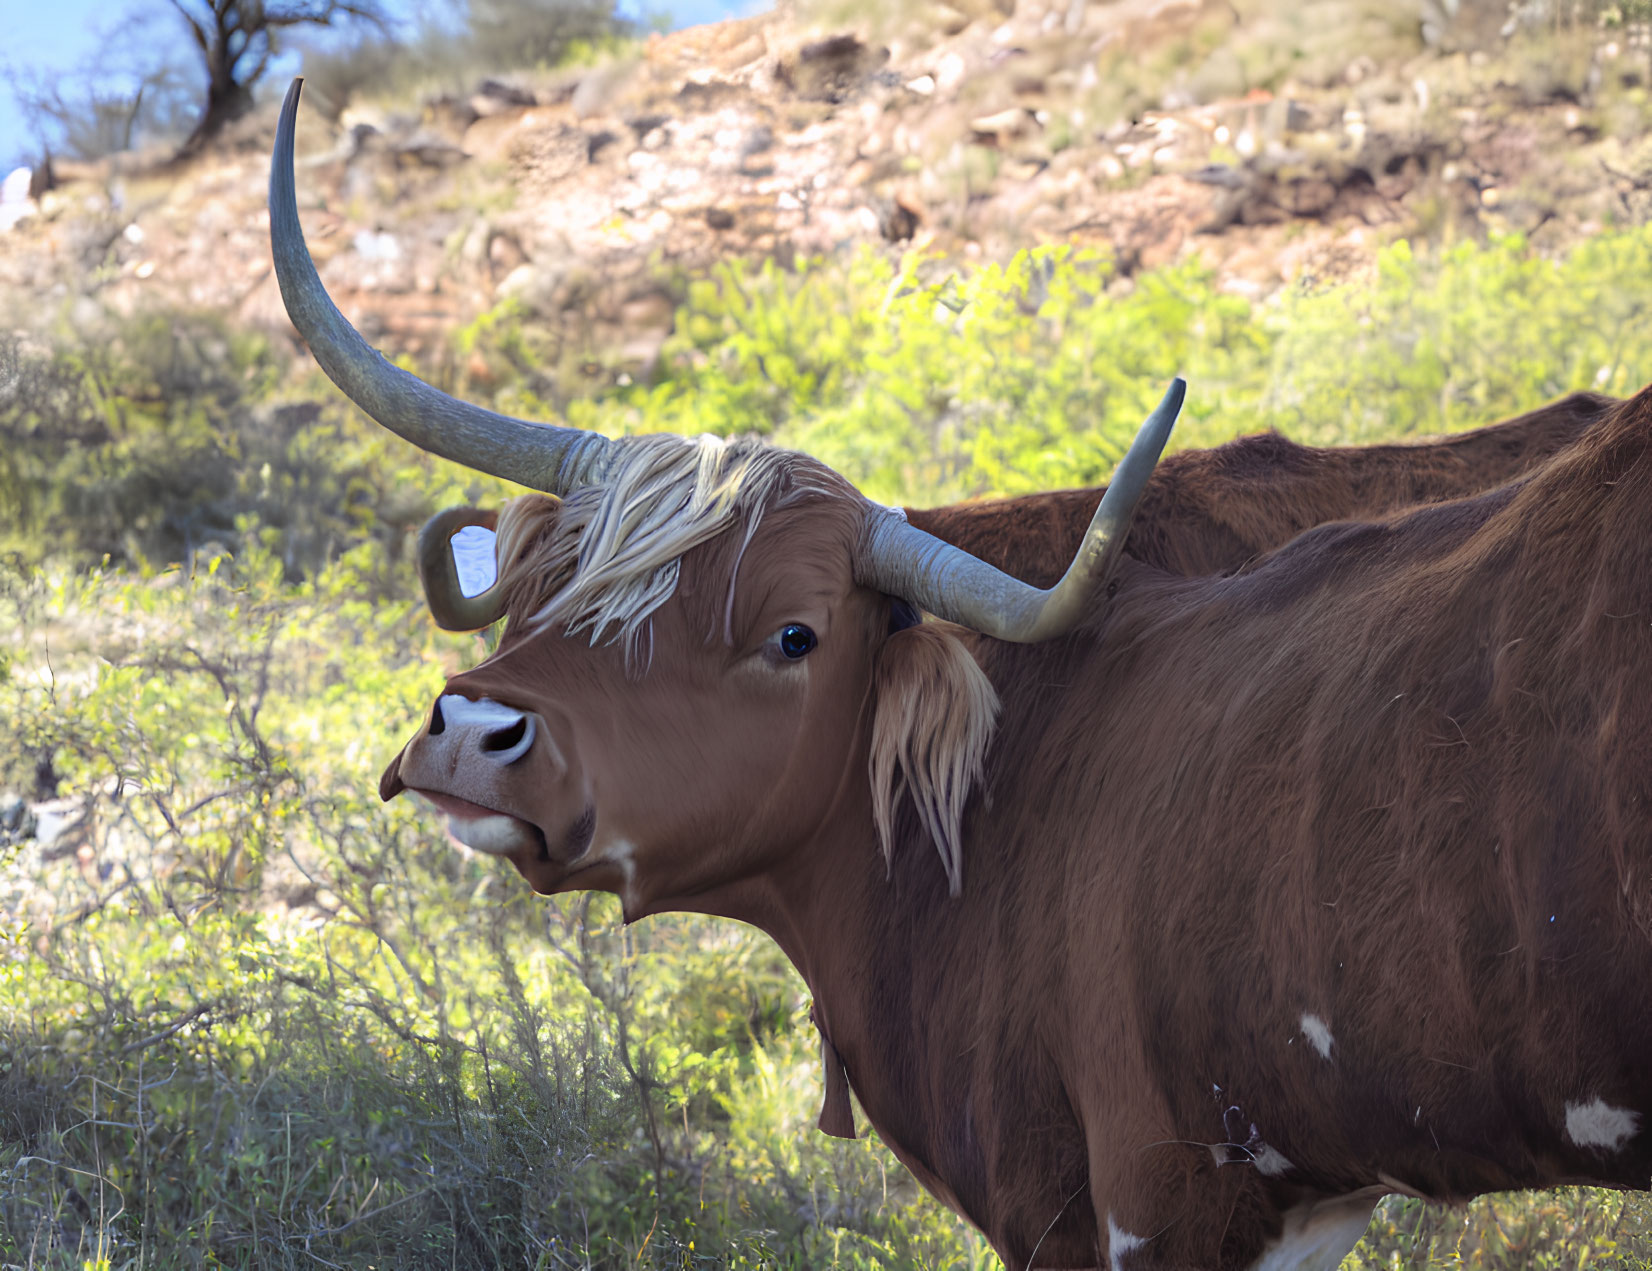 Brown and white Texas Longhorn cow with curved horns in scrubland